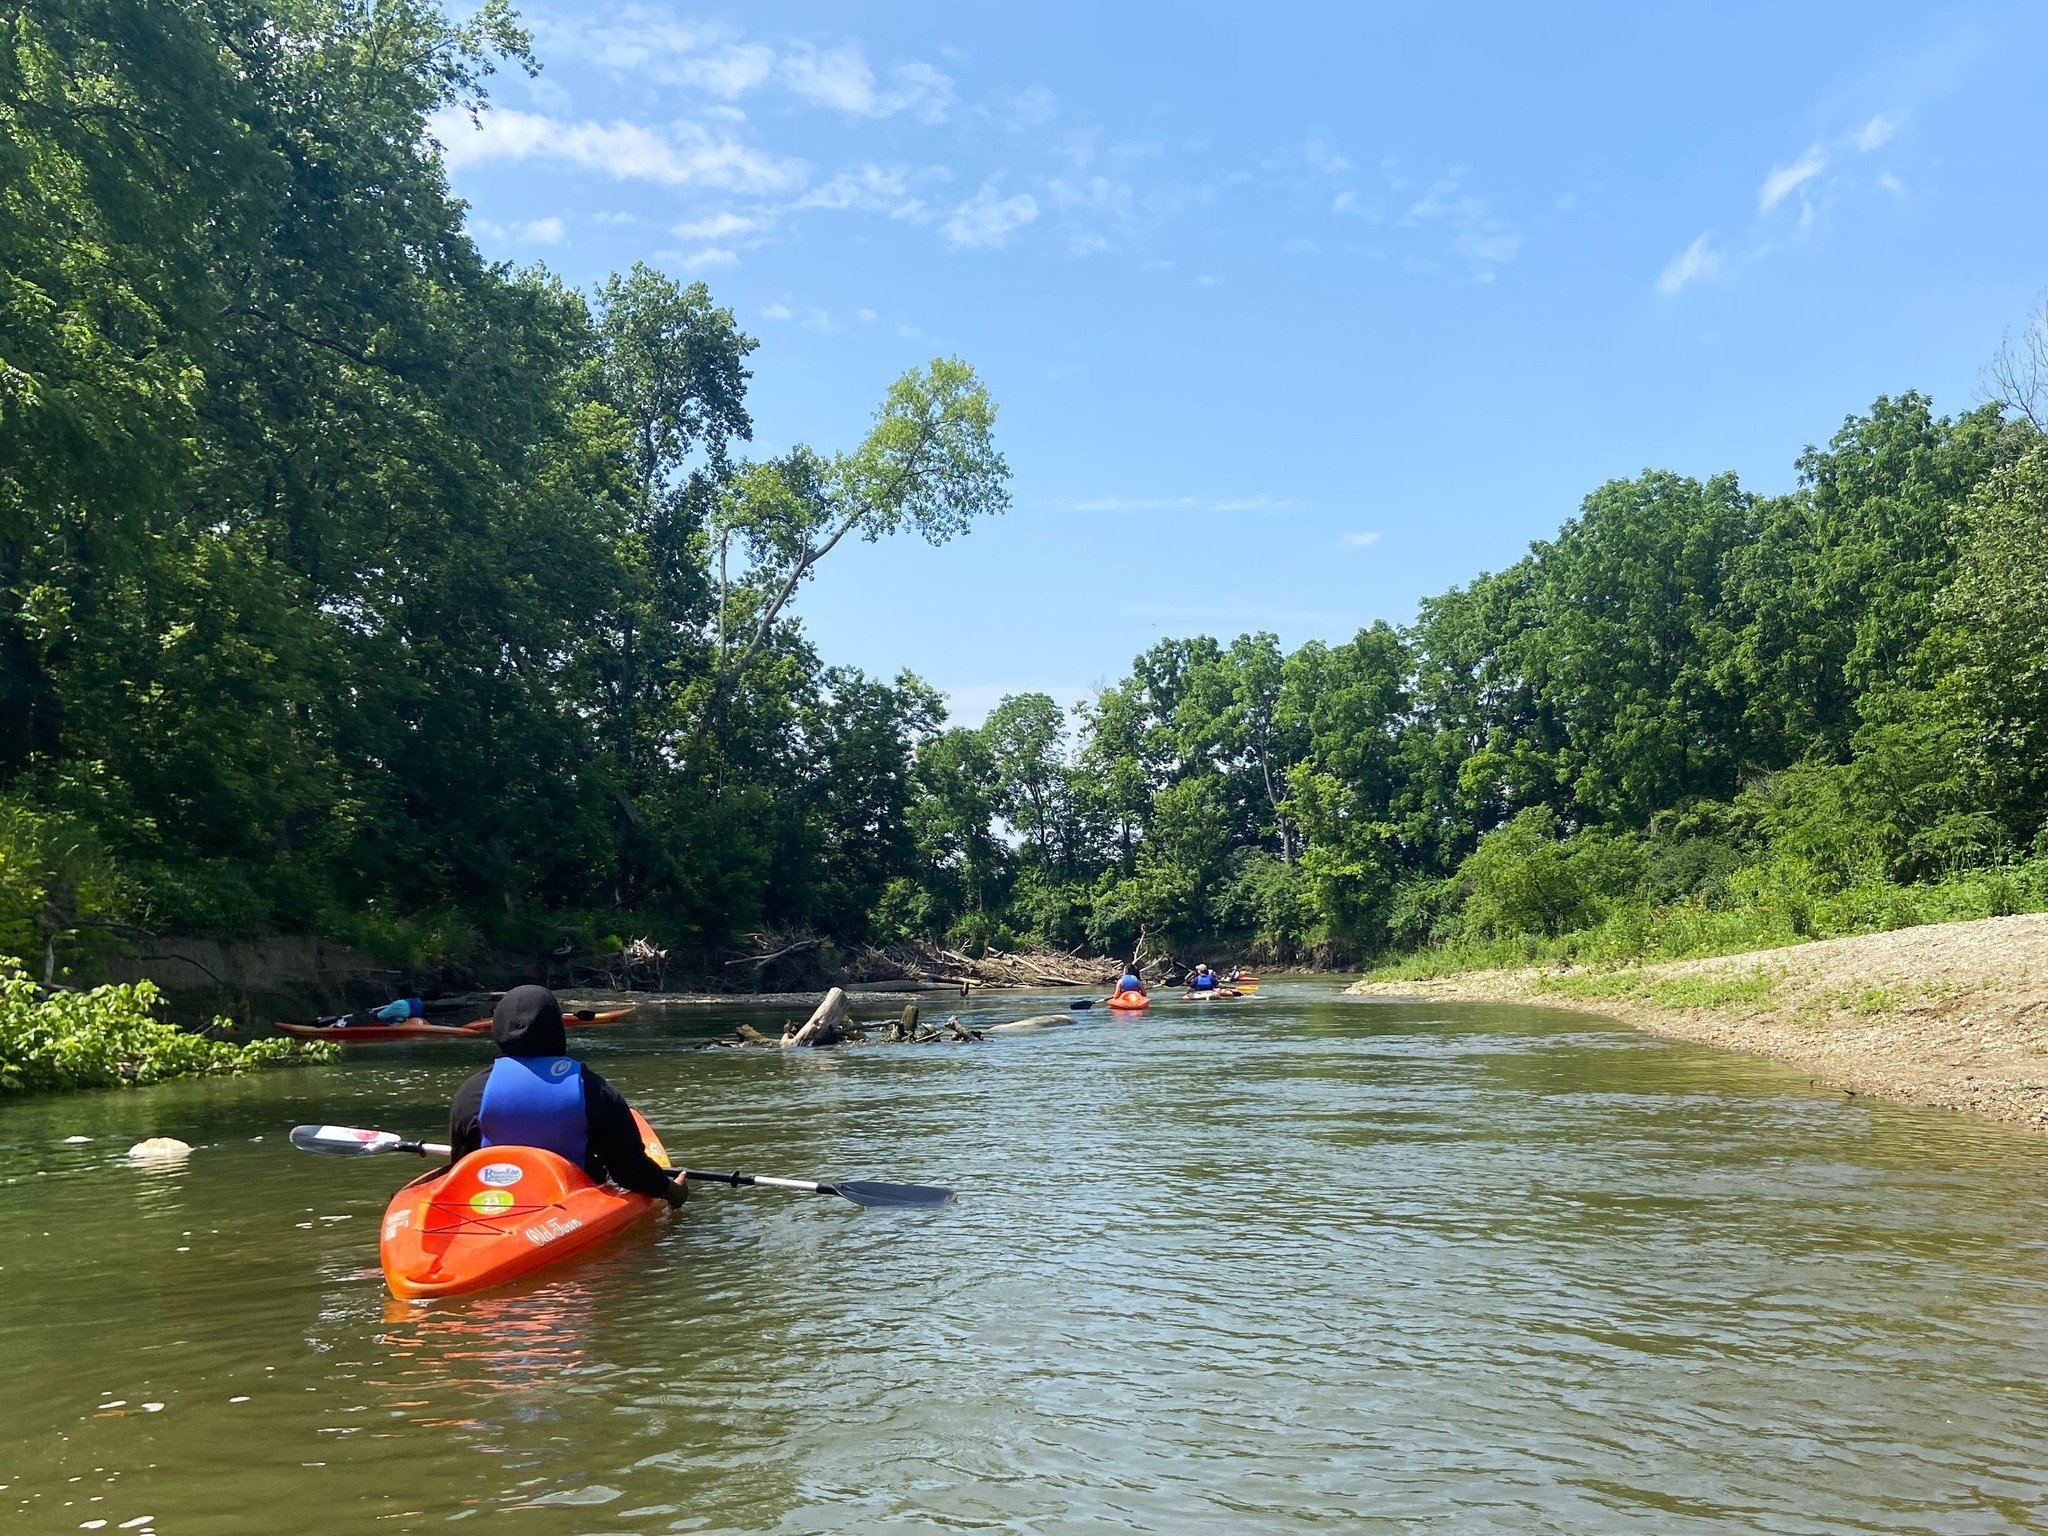 An adventure-filled summer ahead.
🚣🚵
&quot;Summer camps are back again this year! After a very successful first year offering specialized outdoor recreation and conservation day camps in 2023, this June we&rsquo;ll have expanded offerings with some